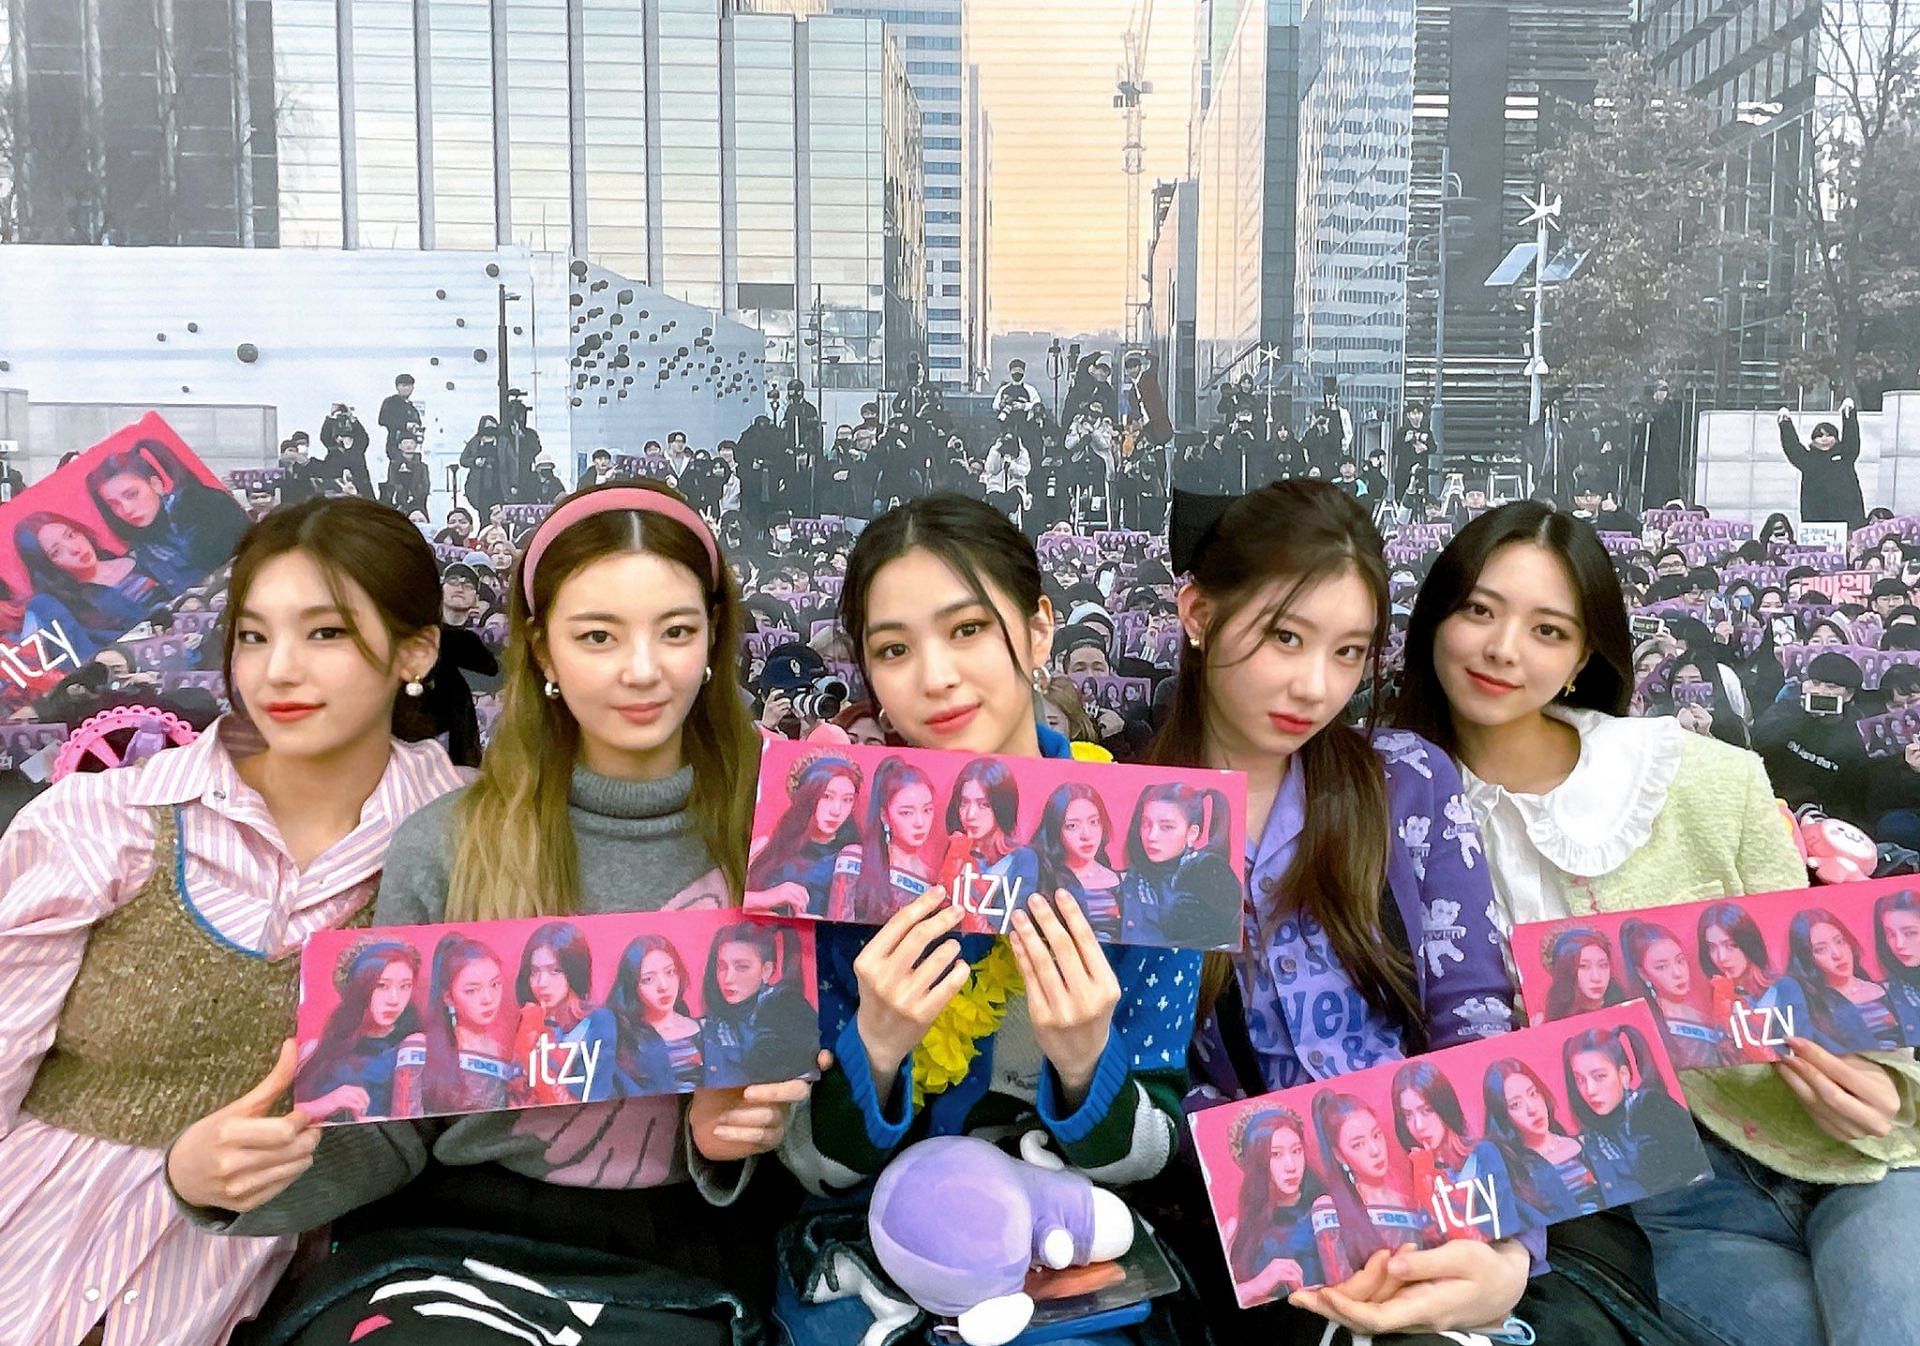 The group recently celebrated their 3rd anniversary (Image via Twitter/@ITZYofficial)